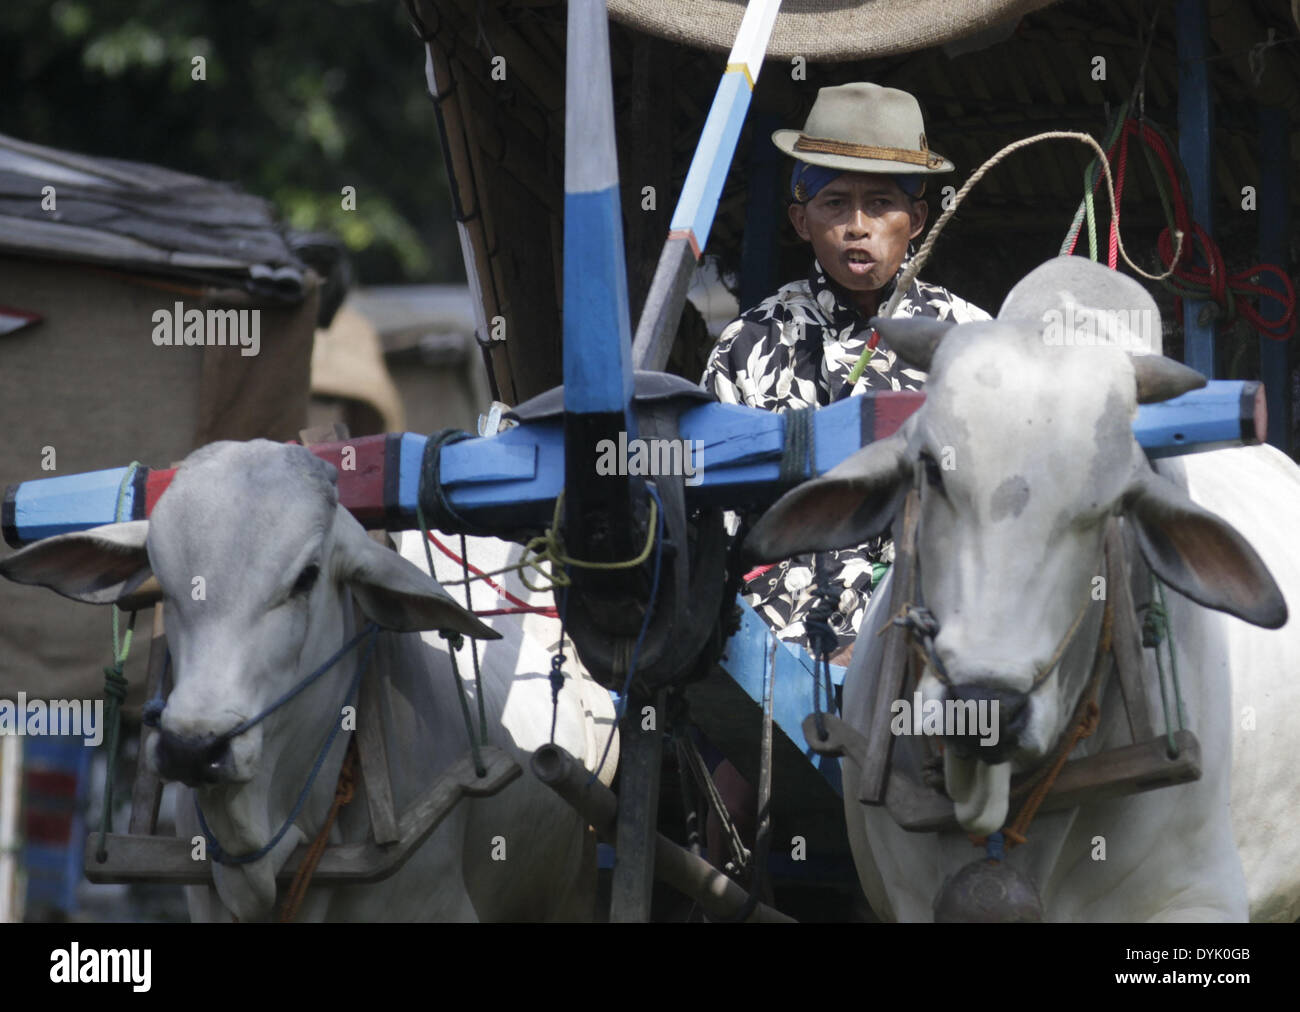 Yogyakarta, Indonesia. 20th Apr, 2014. APRIL 20: Oxcart driver or known as ''Bajingan'' trying to control the motion of cows while following the race riding ox carts on April 20, 2014 in Donoharjo village, Yogyakarta, Indonesia. Traditional transportation that uses cows as towing carts are still used by citizens as a means of conveyance. © Sijori Images/ZUMAPRESS.com/Alamy Live News Stock Photo